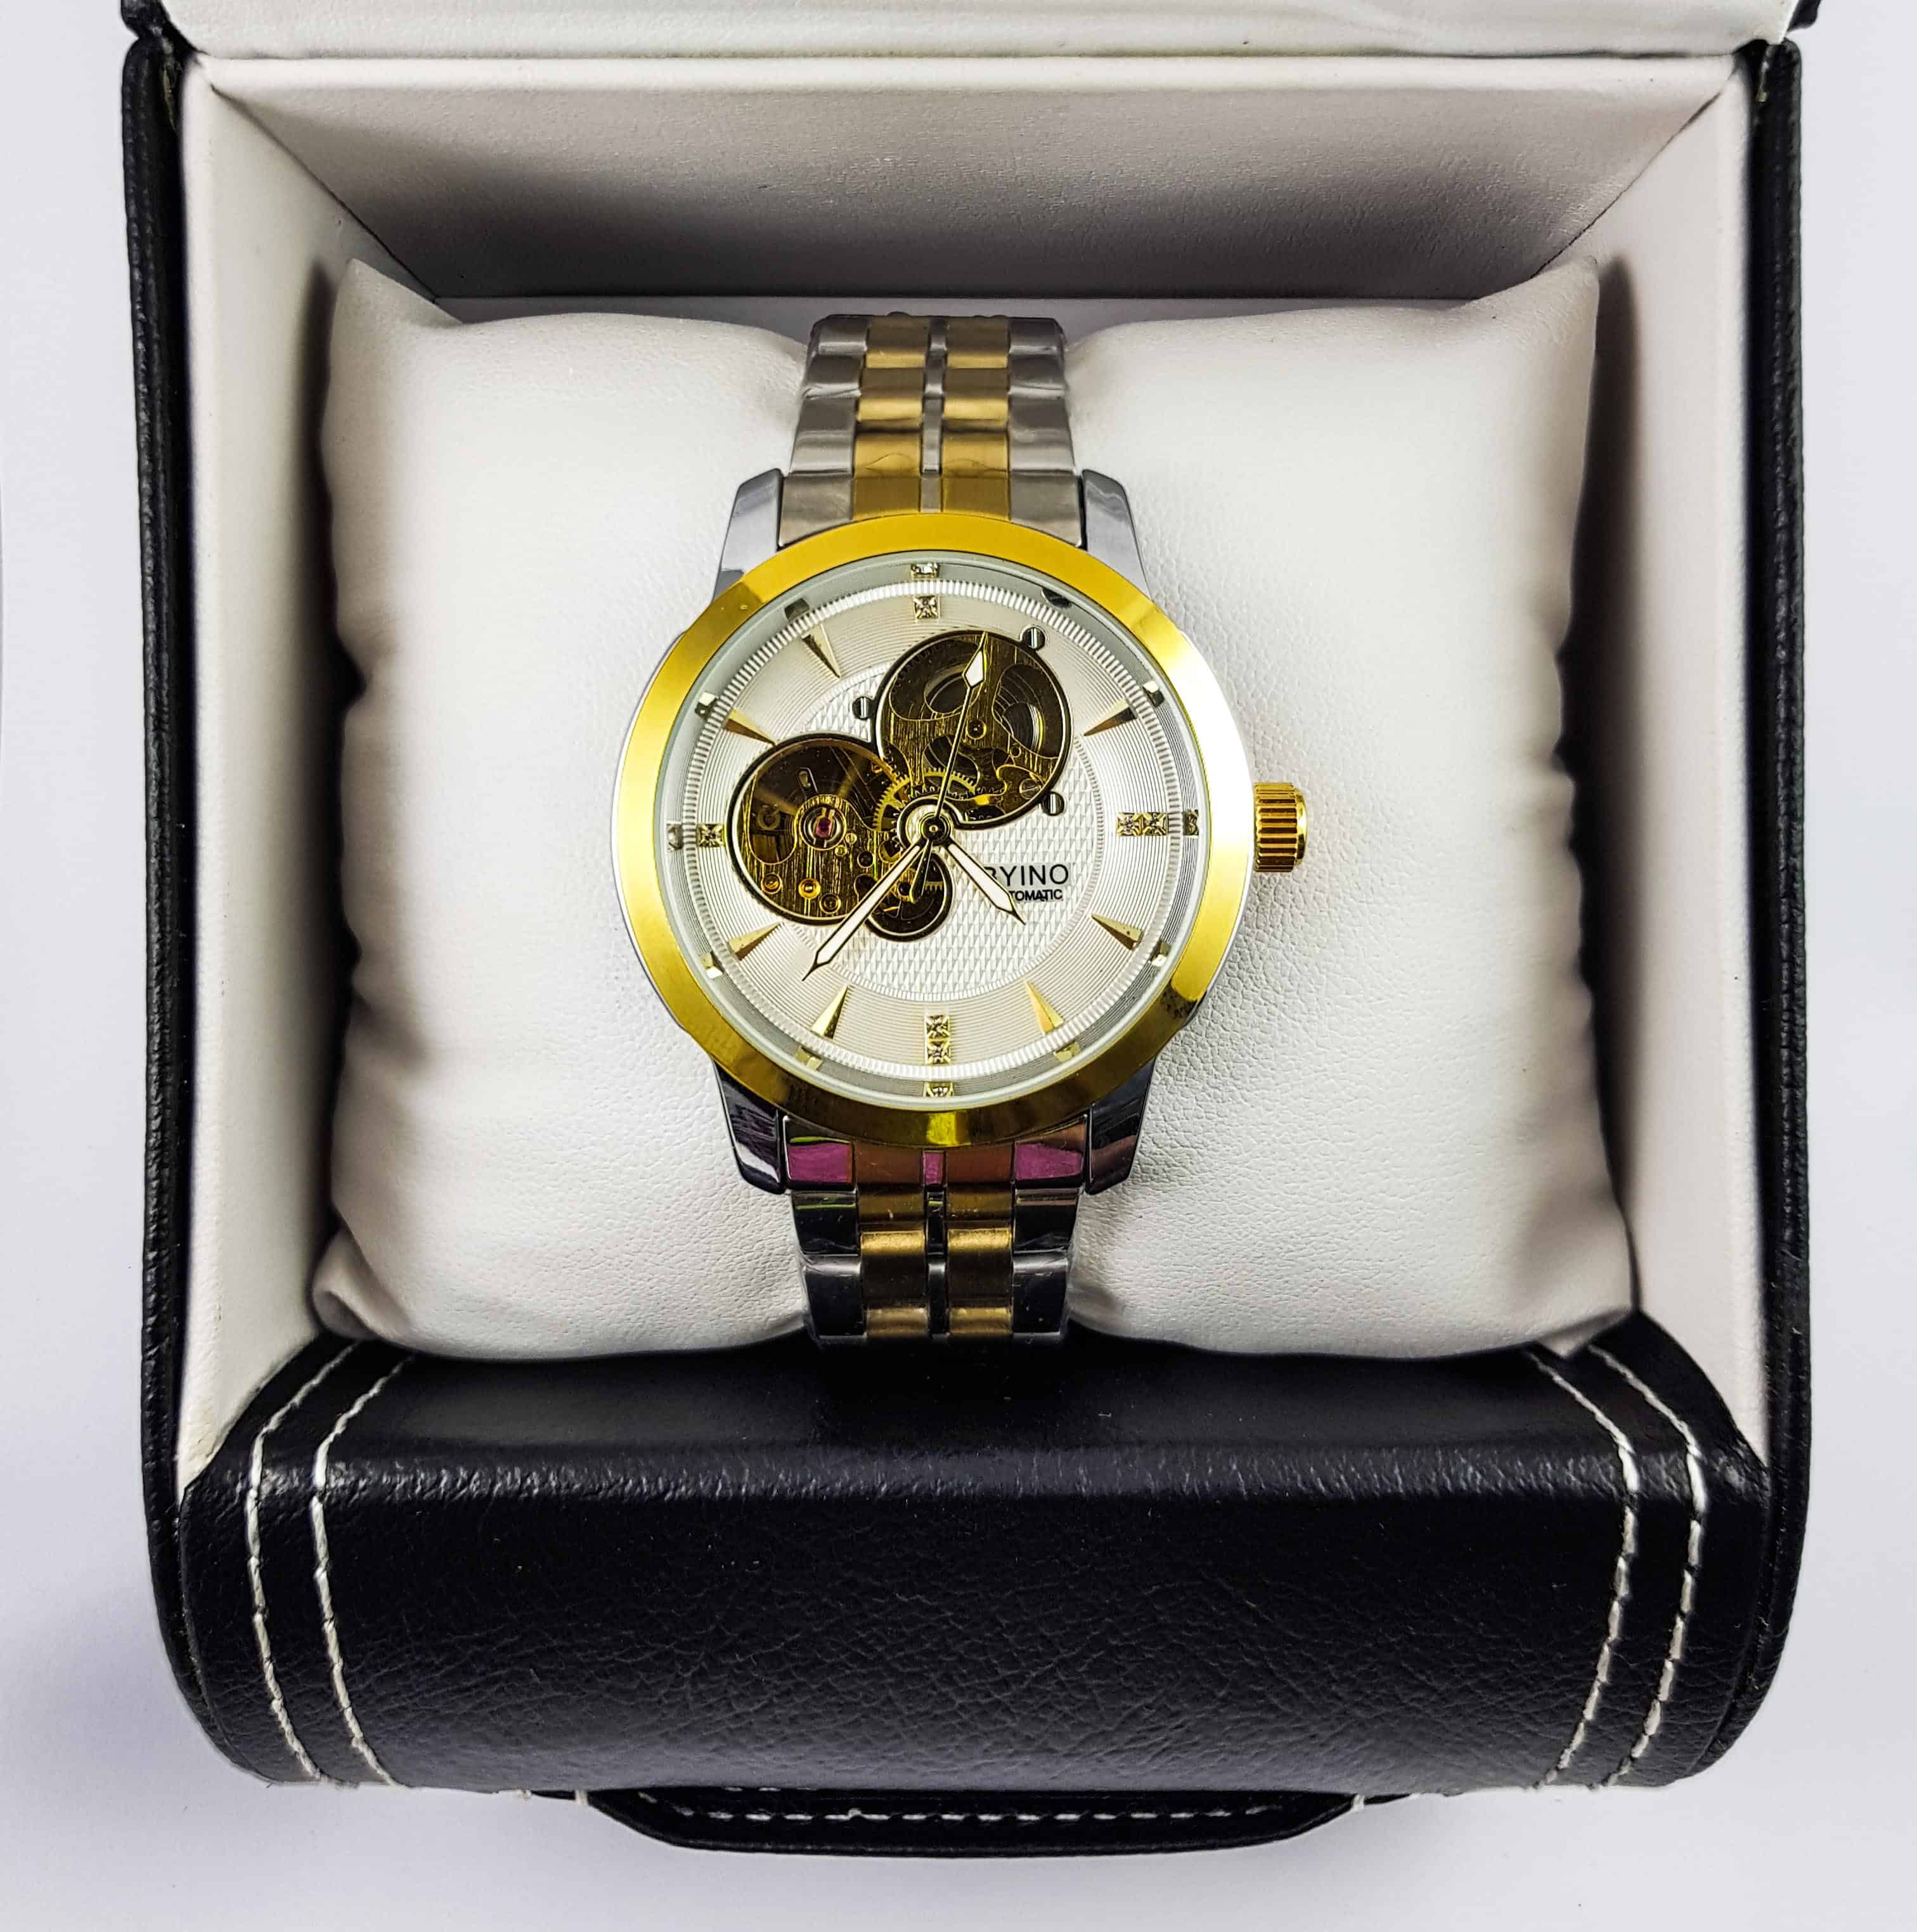 Byino Skeleton Automatic Wrist Watch for Men Gold & Silver » Daddy ...